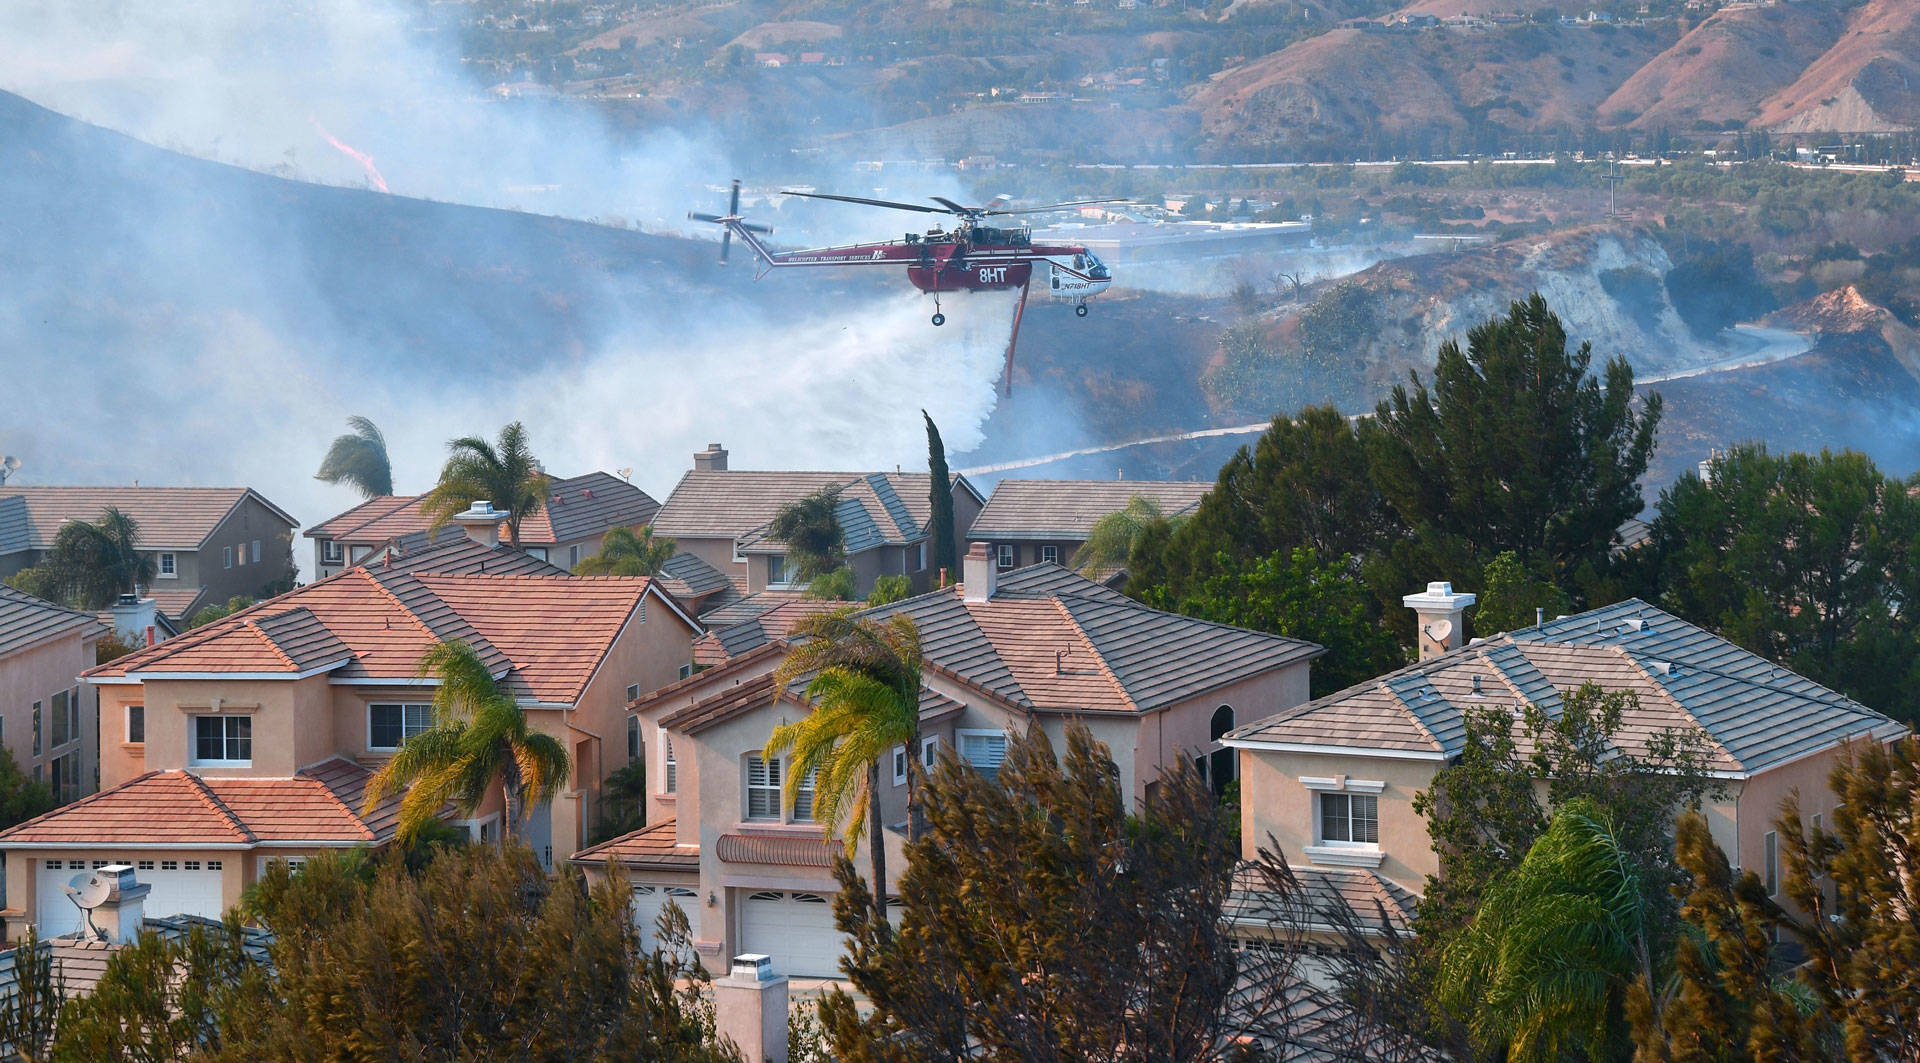 A helicopter drops water near homes at the Anaheim Hills neighborhood in Anaheim on Oct. 9, 2017, after a fire spread quickly through the area prompting mandatory evacuations and freeway closures. FREDERIC J. BROWN/AFP/Getty Images